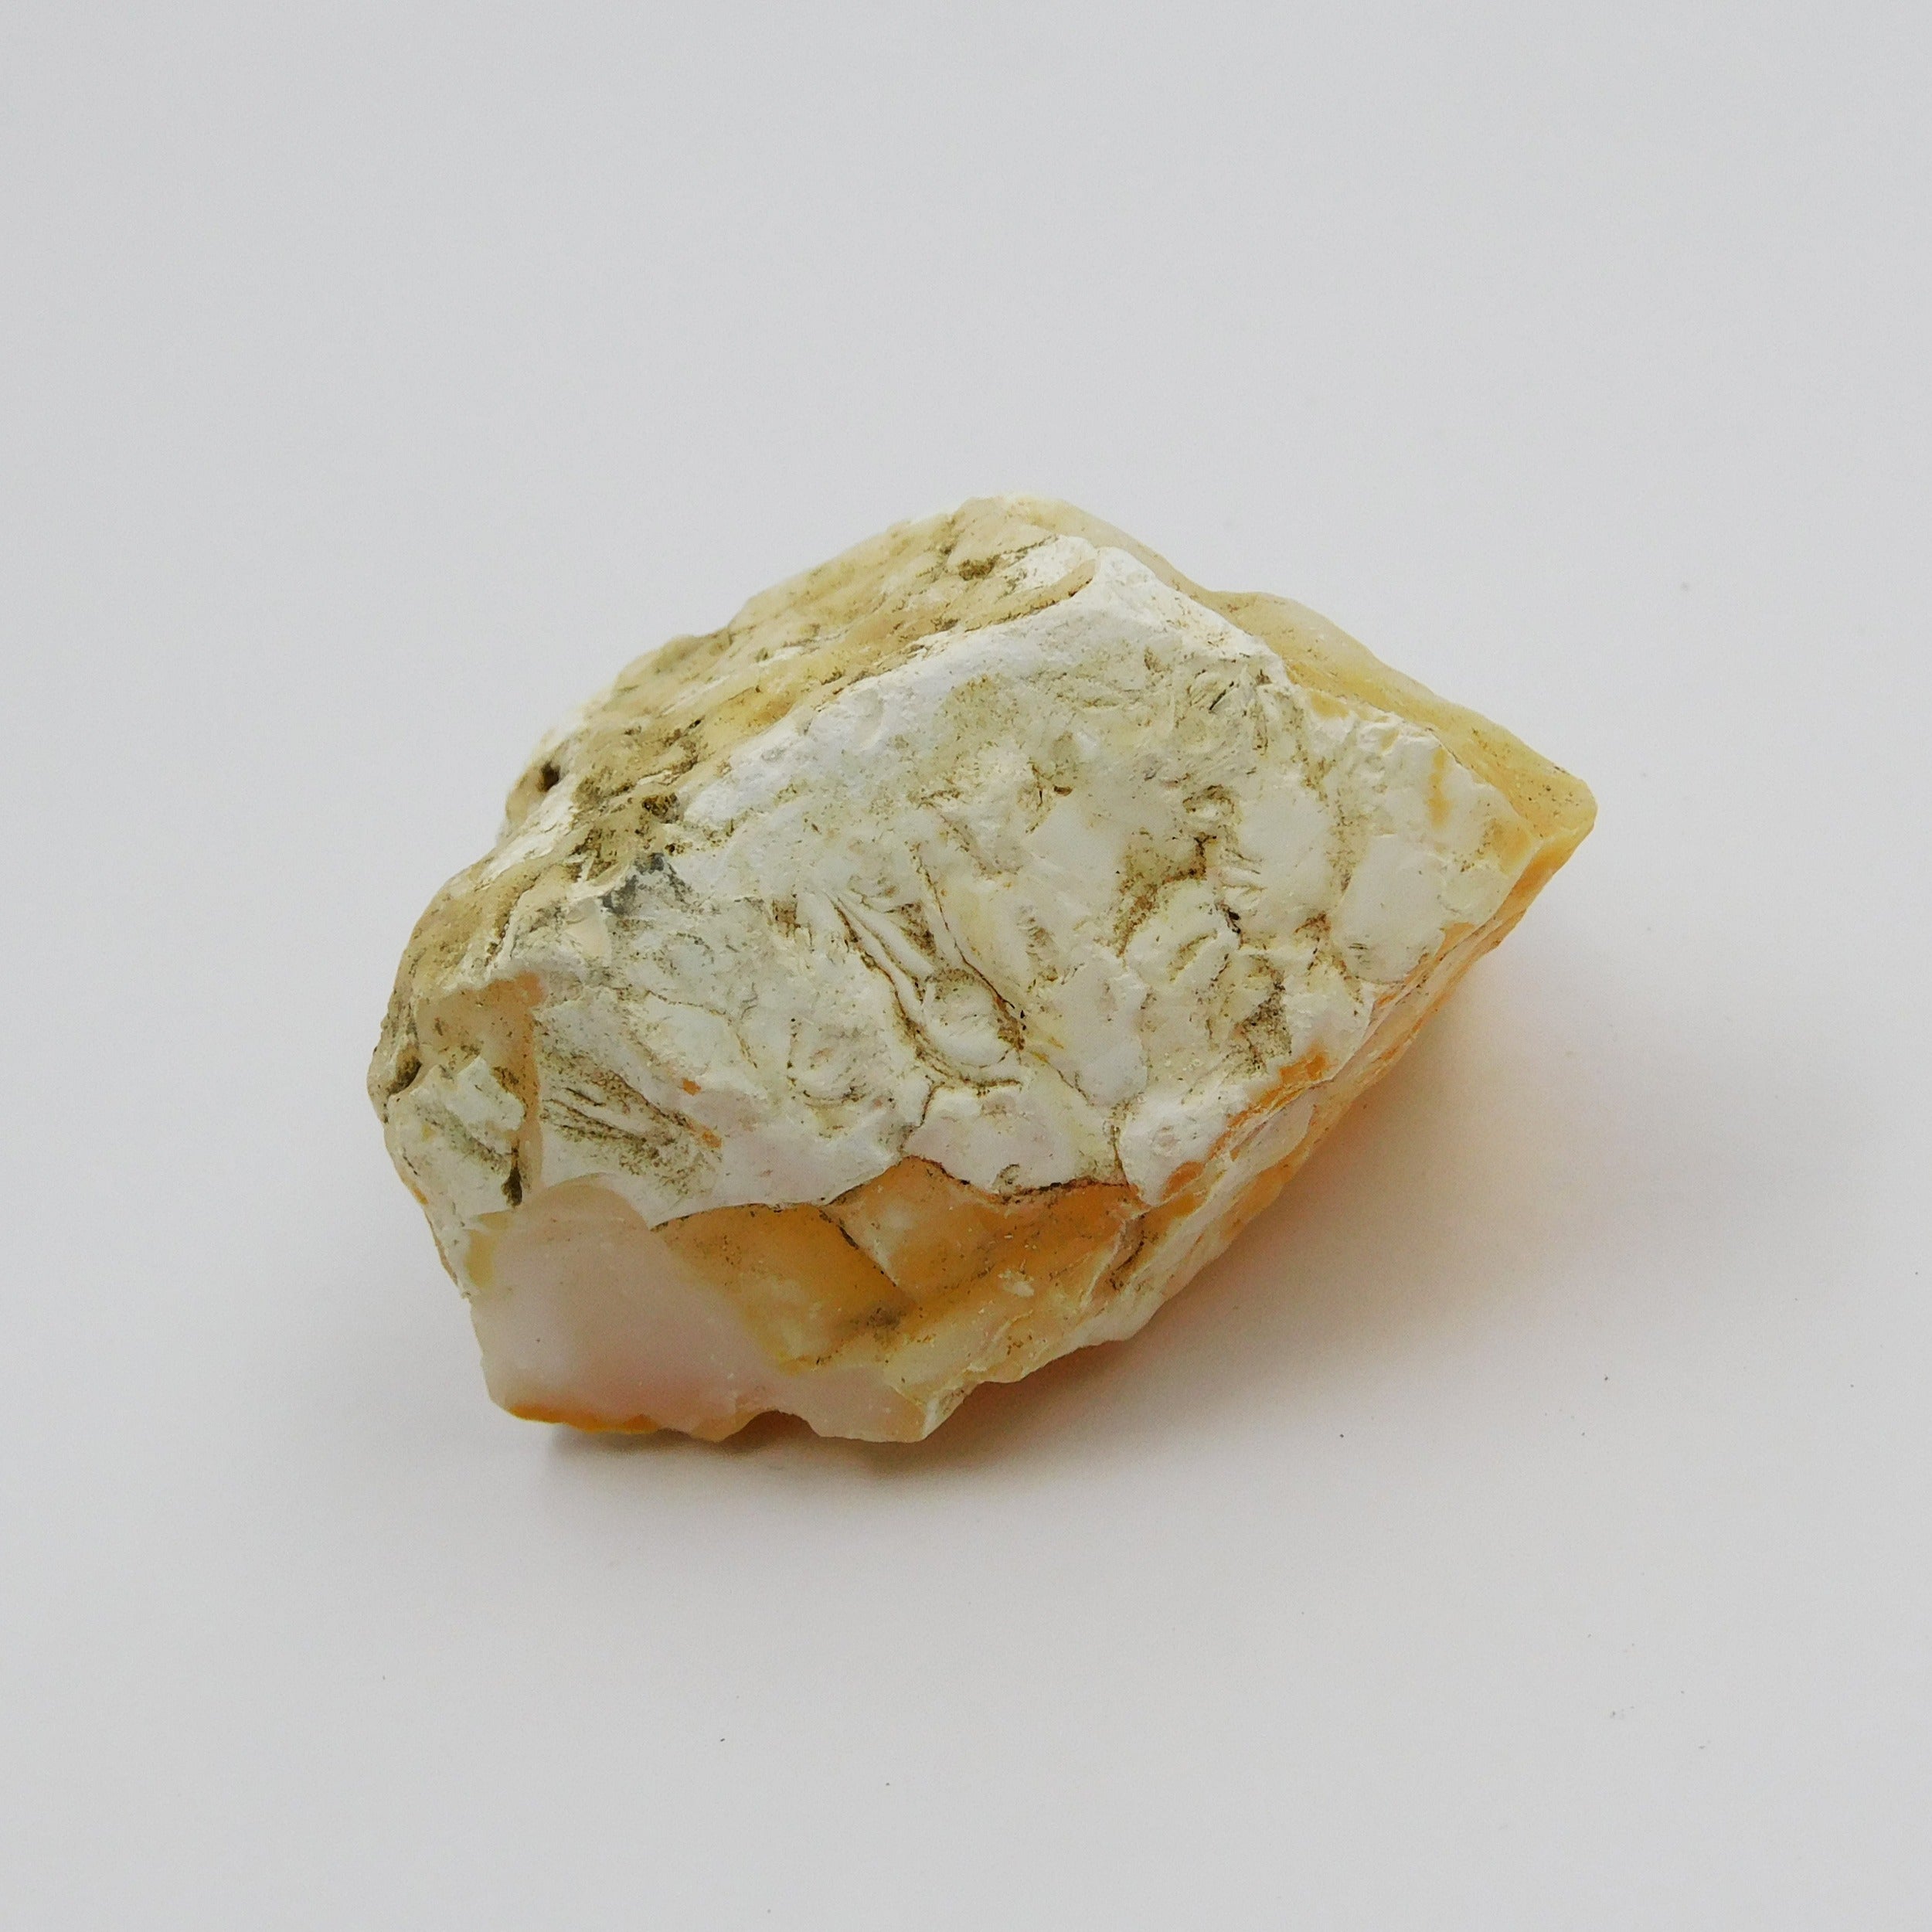 442.05 Carat Huge Size Natural White Color Opal Rough Certified Loose Gemstone Rough | Super Quality Opal Rough Gemstone -Free Gift With Free Shipping